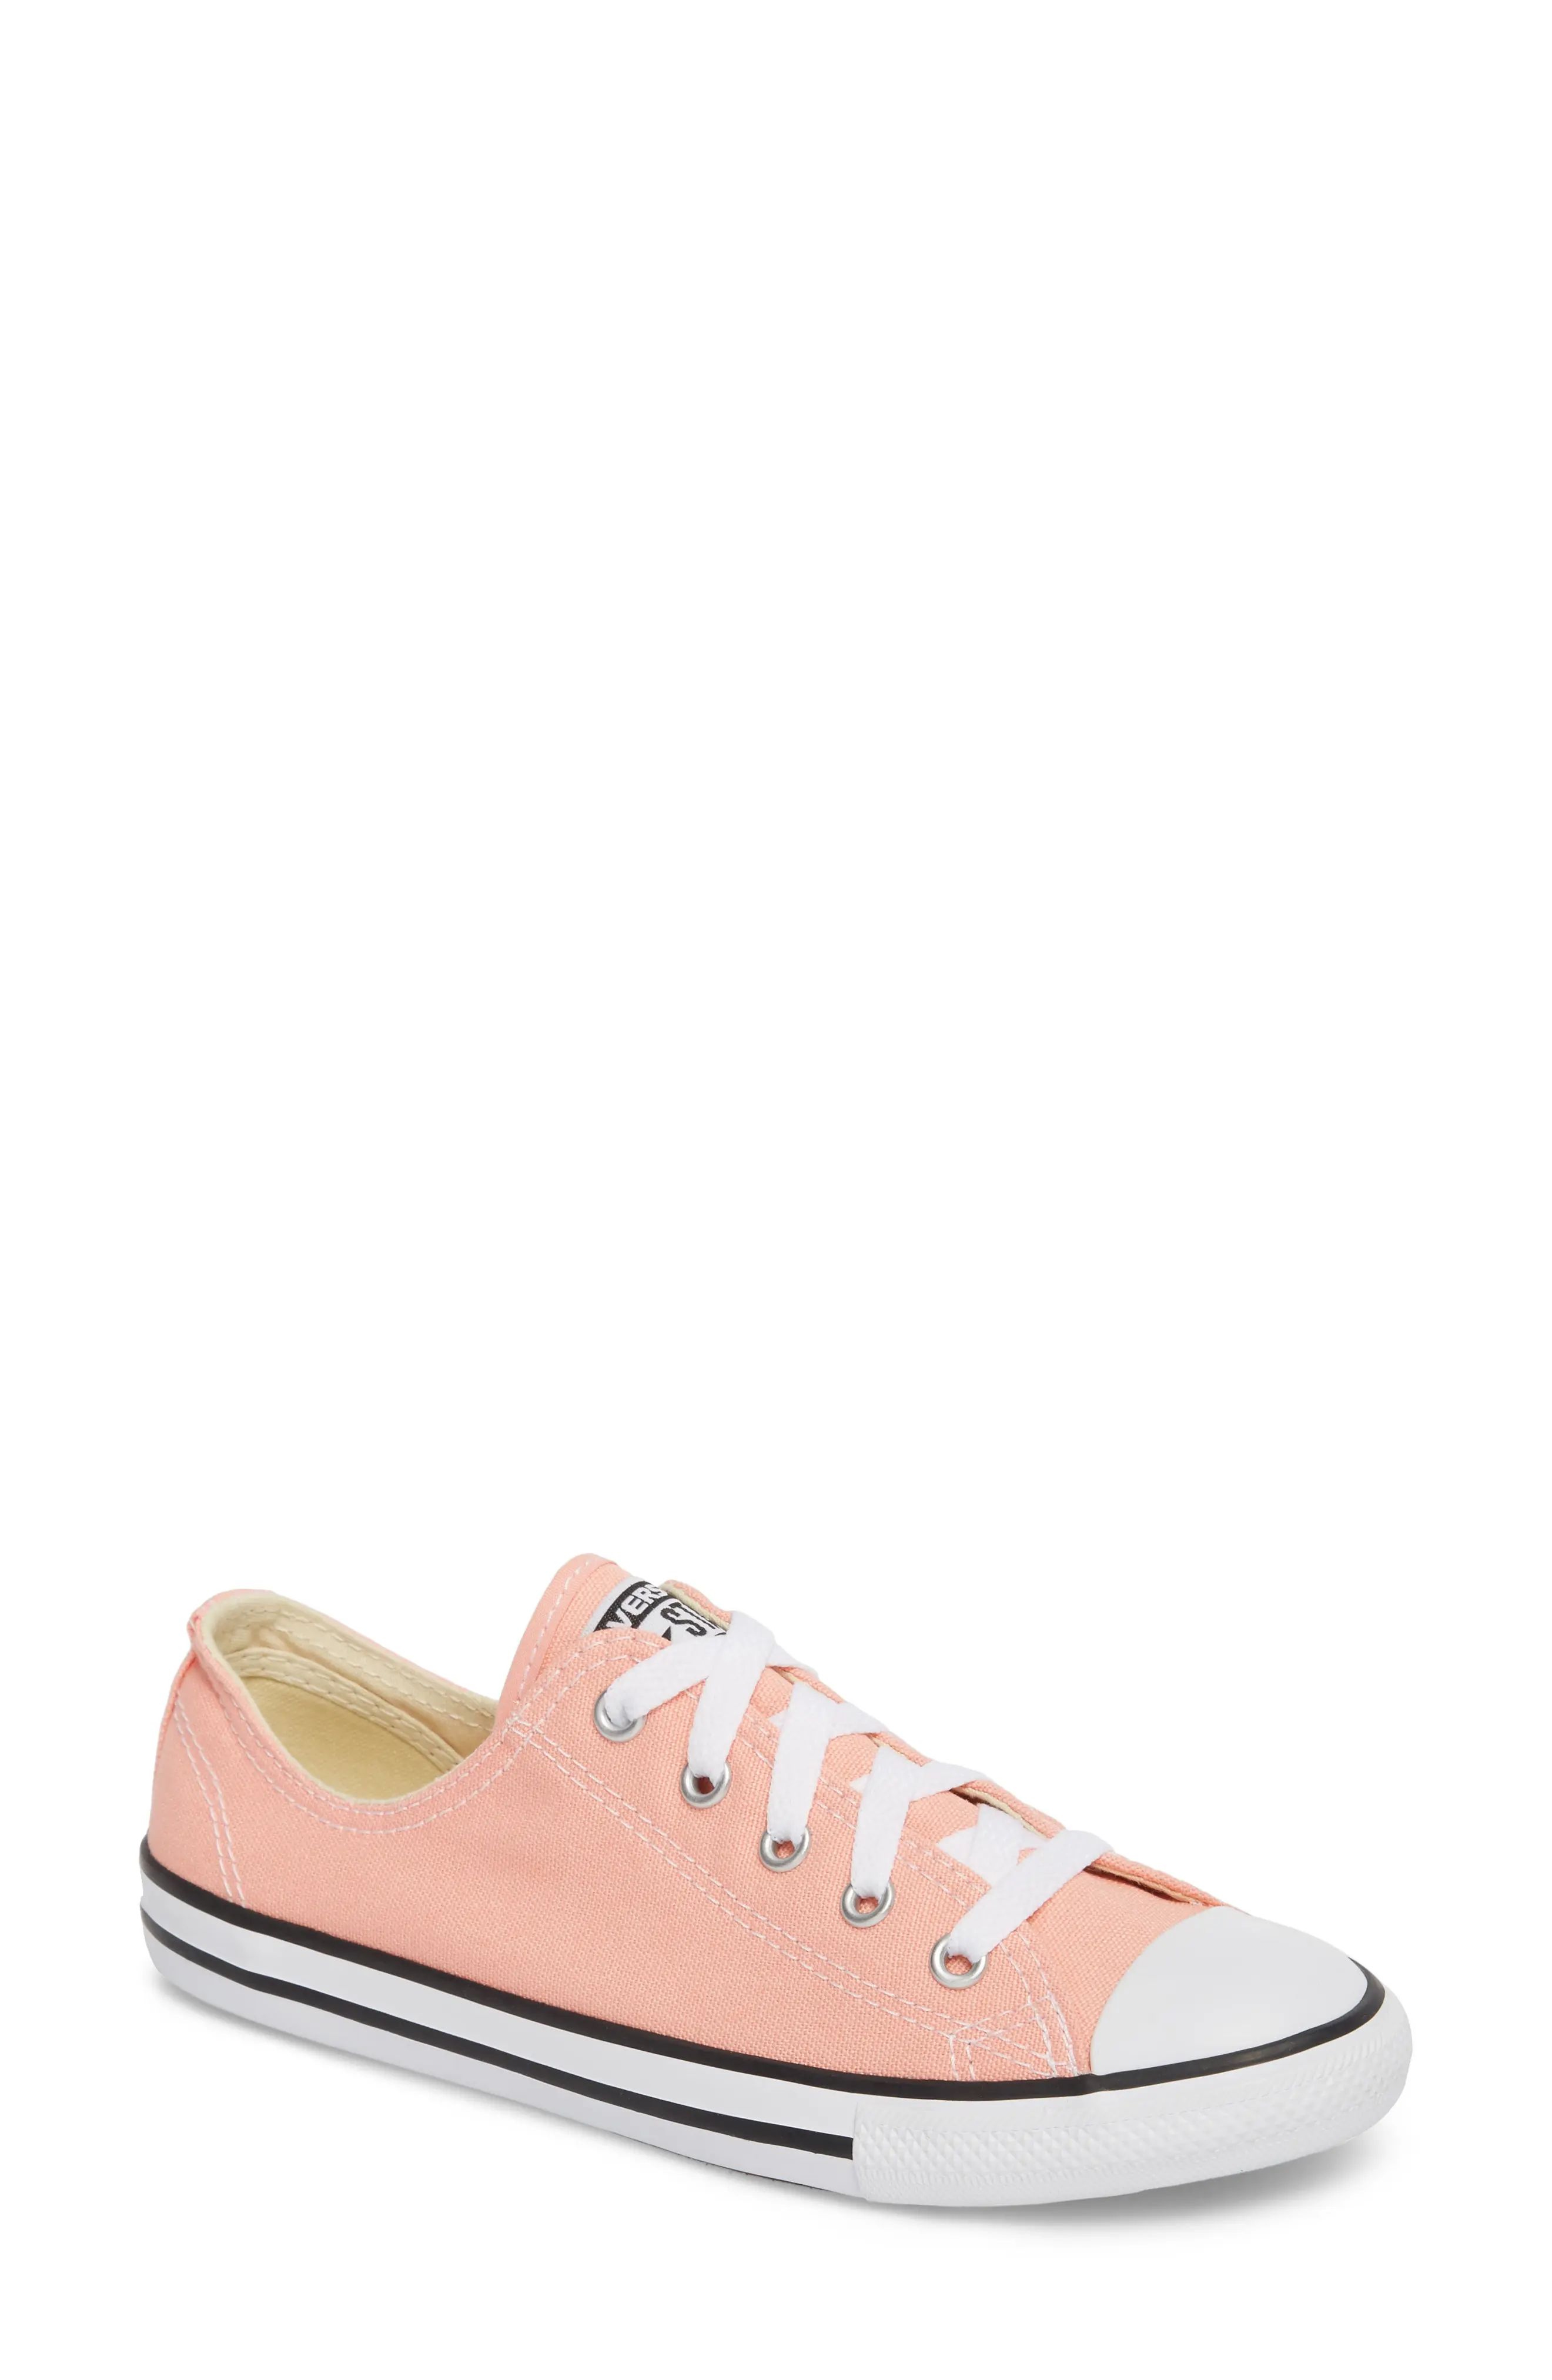 Chuck Taylor<sup>®</sup> All Star<sup>®</sup> Dainty Ox Low Top Sneaker | Nordstrom